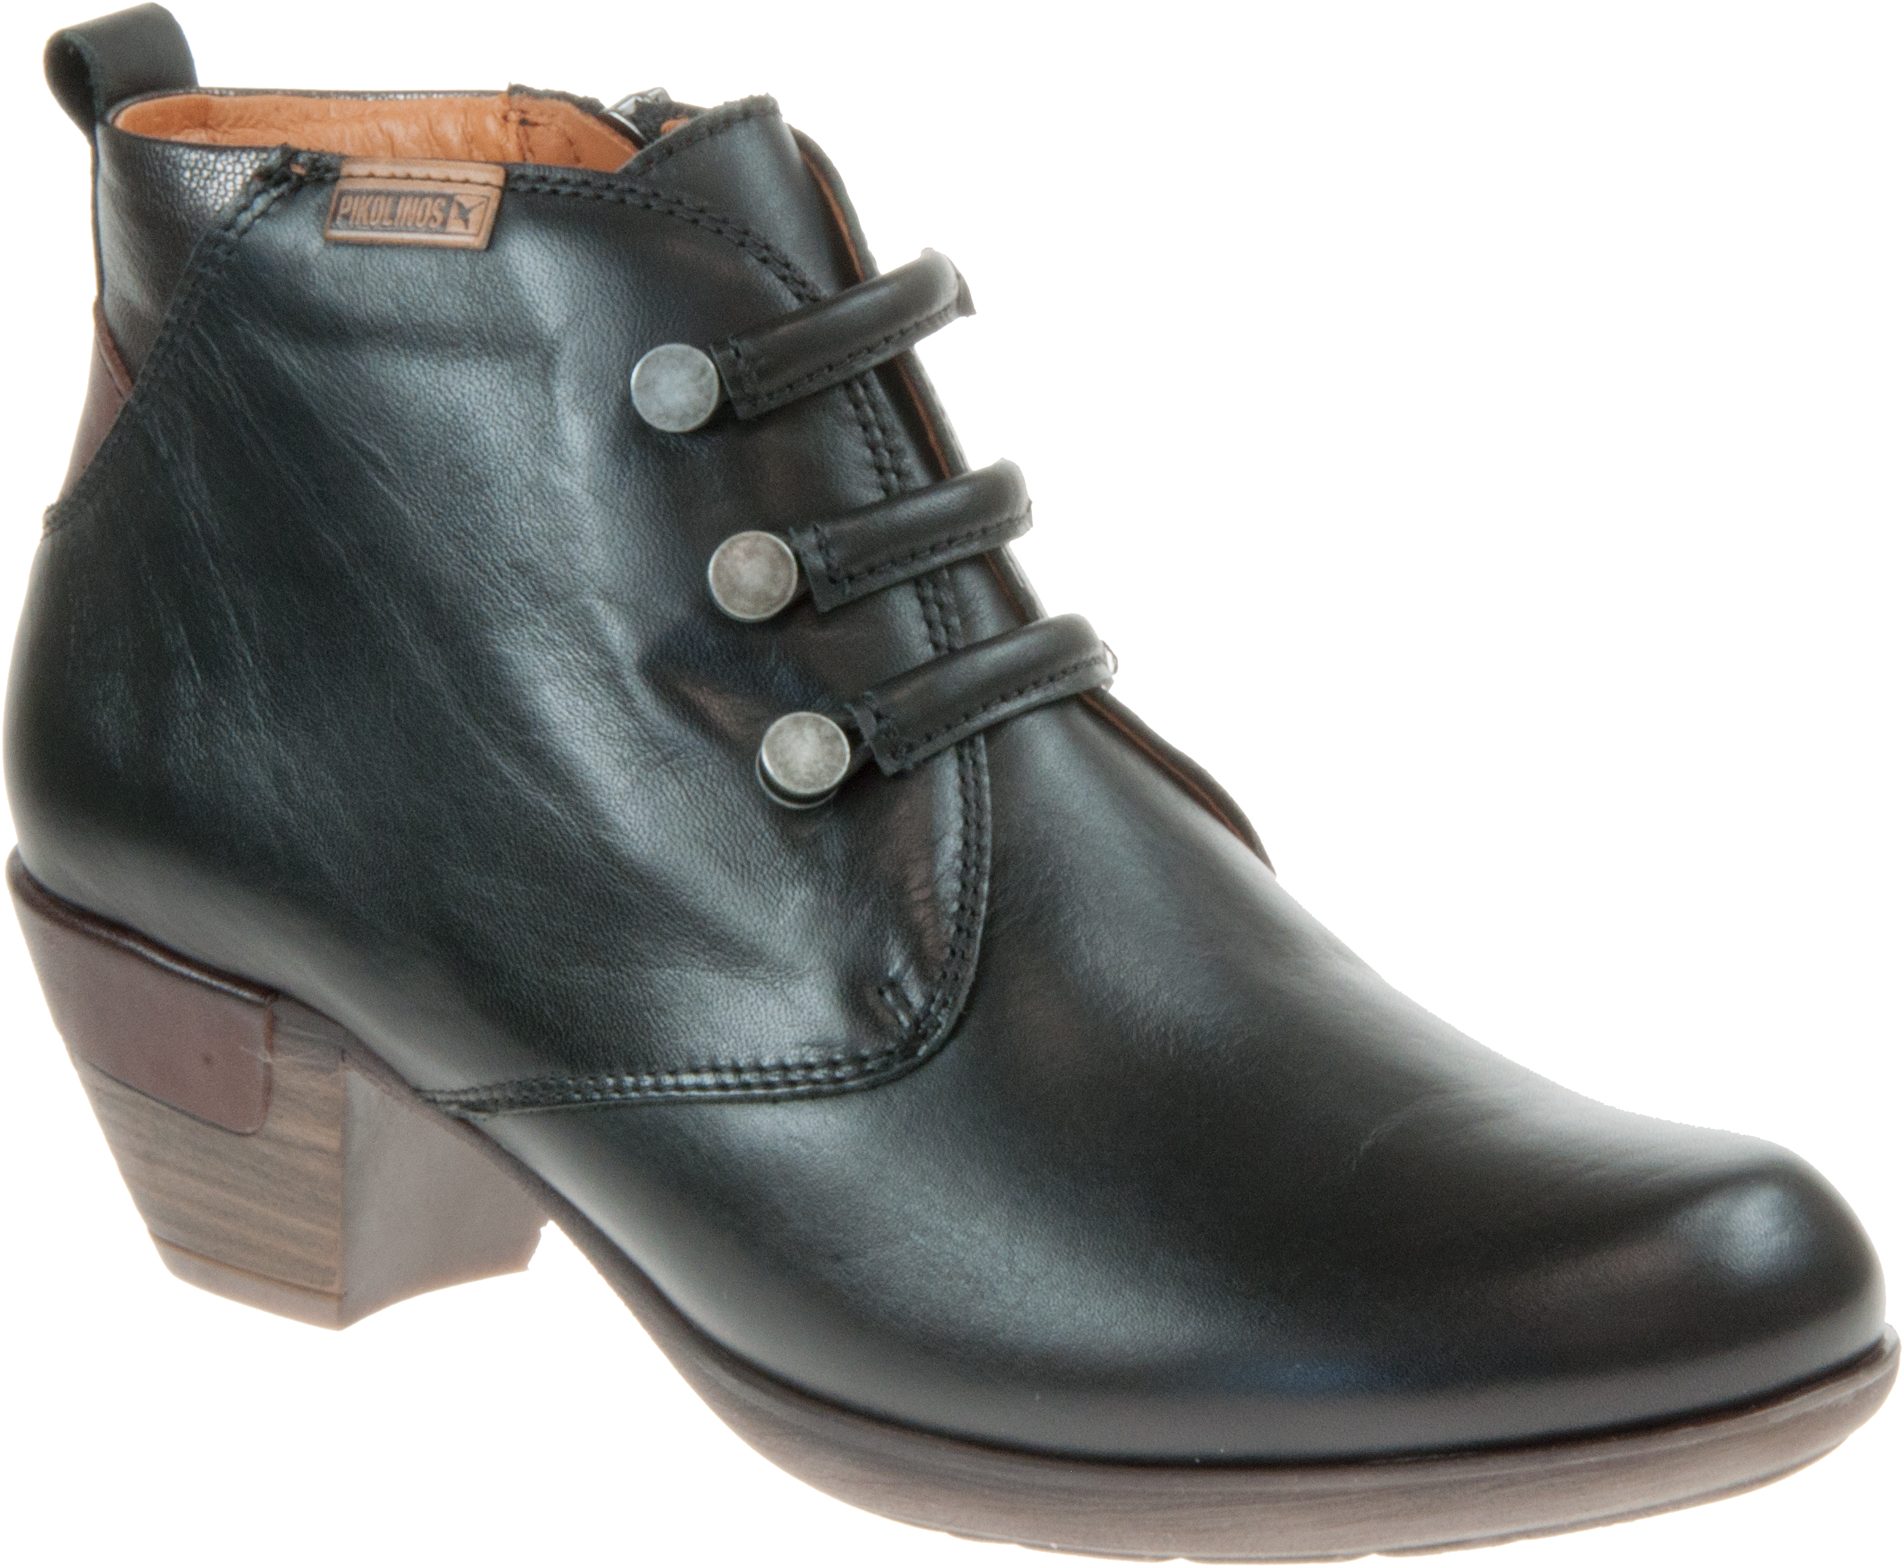 Pikolinos Rotterdam 8746 Black 902-8746 000 - Ankle Boots - Humphries Shoes